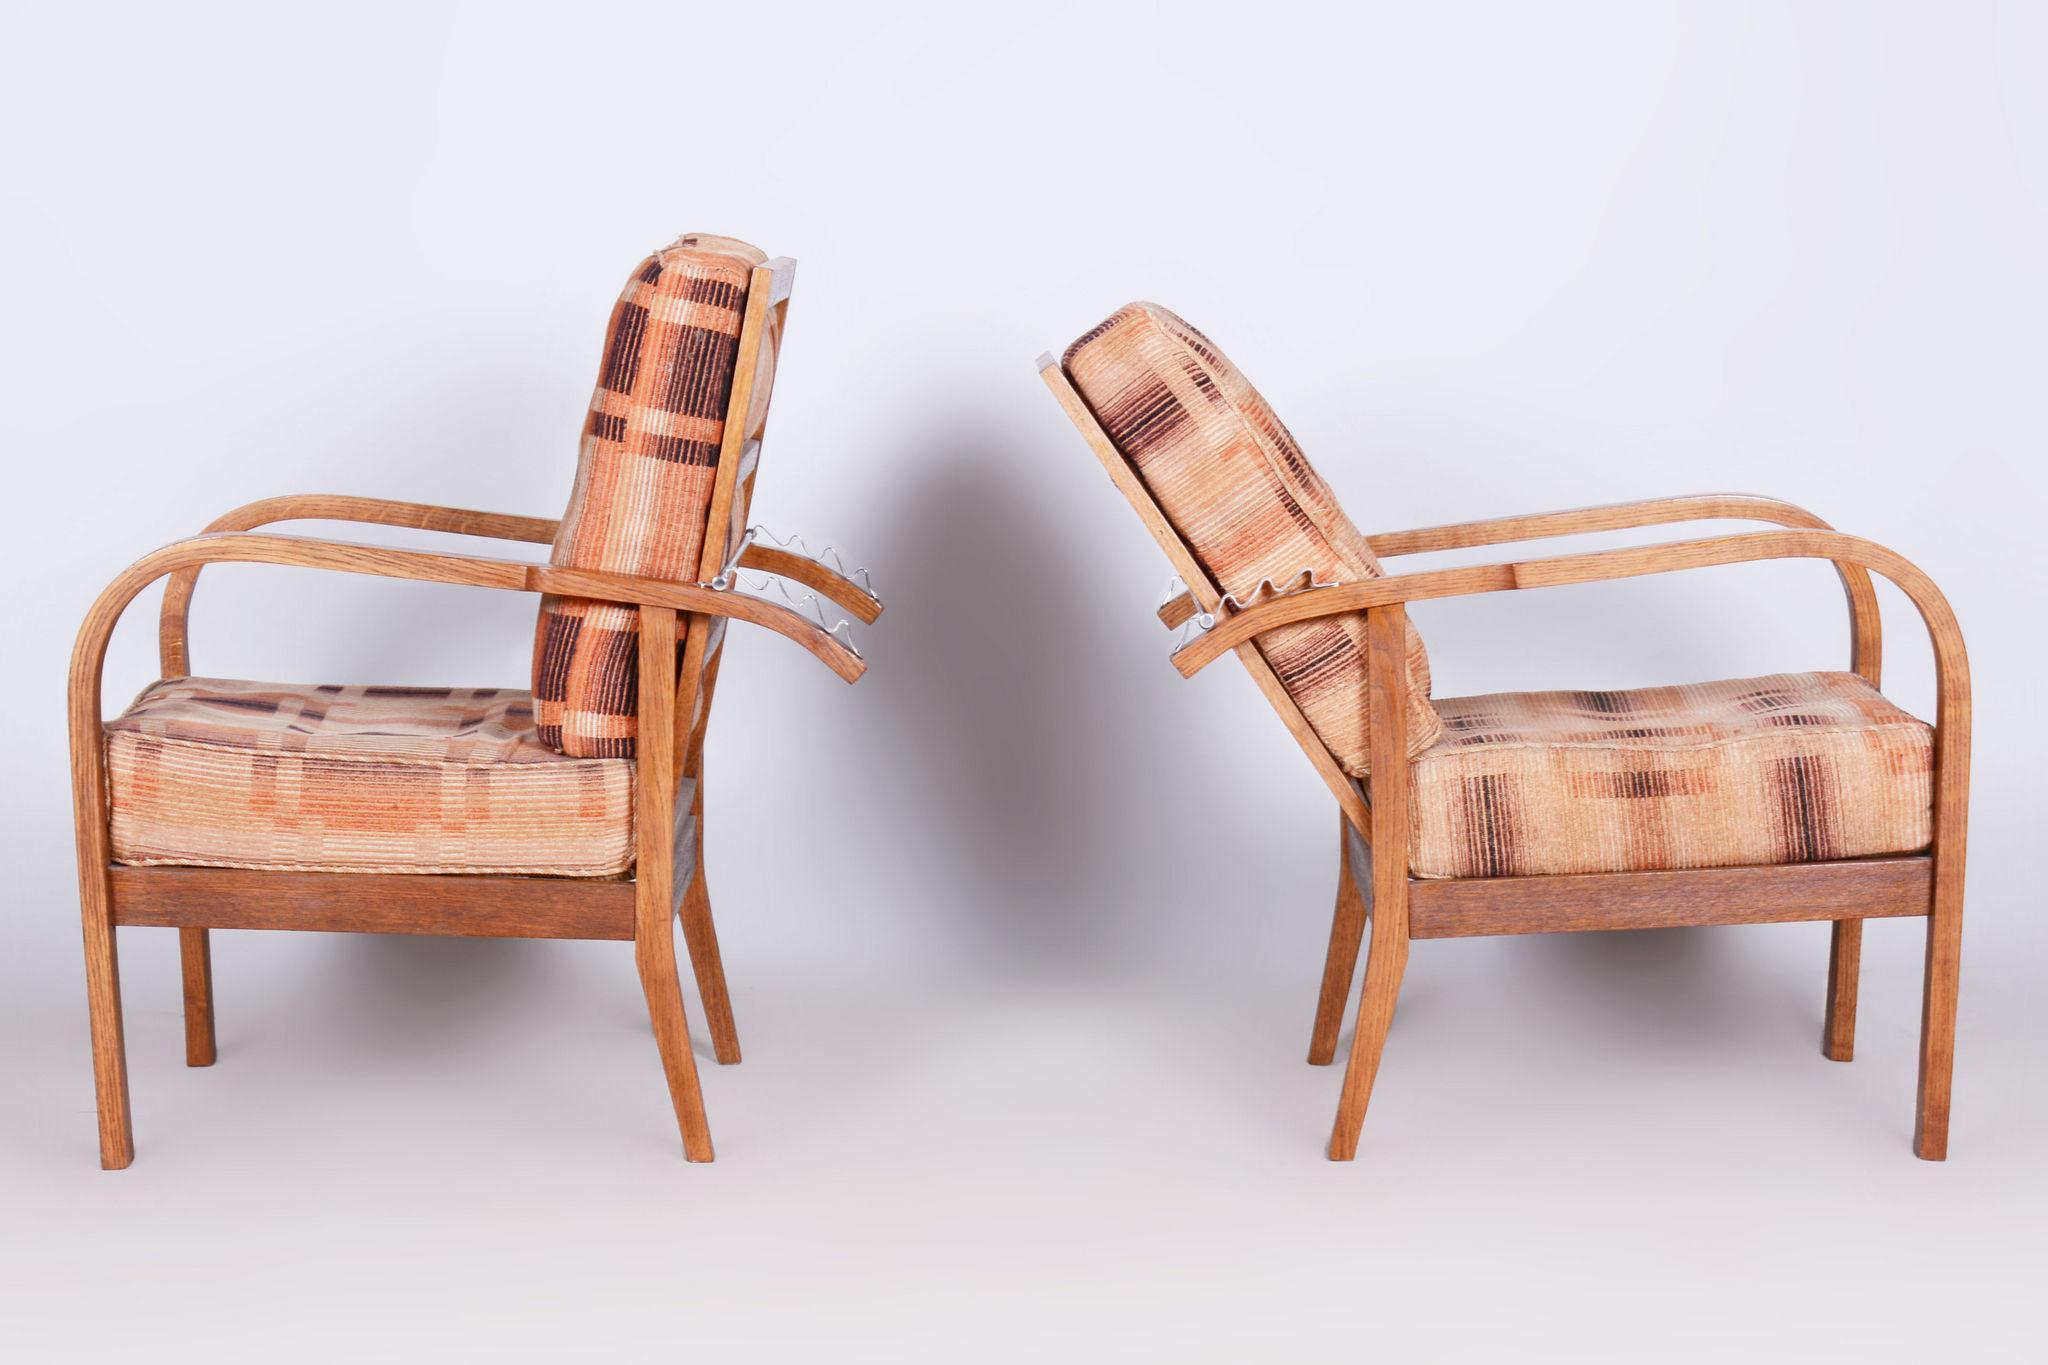 Restored ArtDeco Pair of Reclining Chairs Designed by Jindrich Halabala.

Designer: Jindřich Halabala
Maker: UP Závody
Source: Czechia 
Period: 1930-1939
Material: Oak

Revived polish.
Original upholstery in very good condition.

Designed by